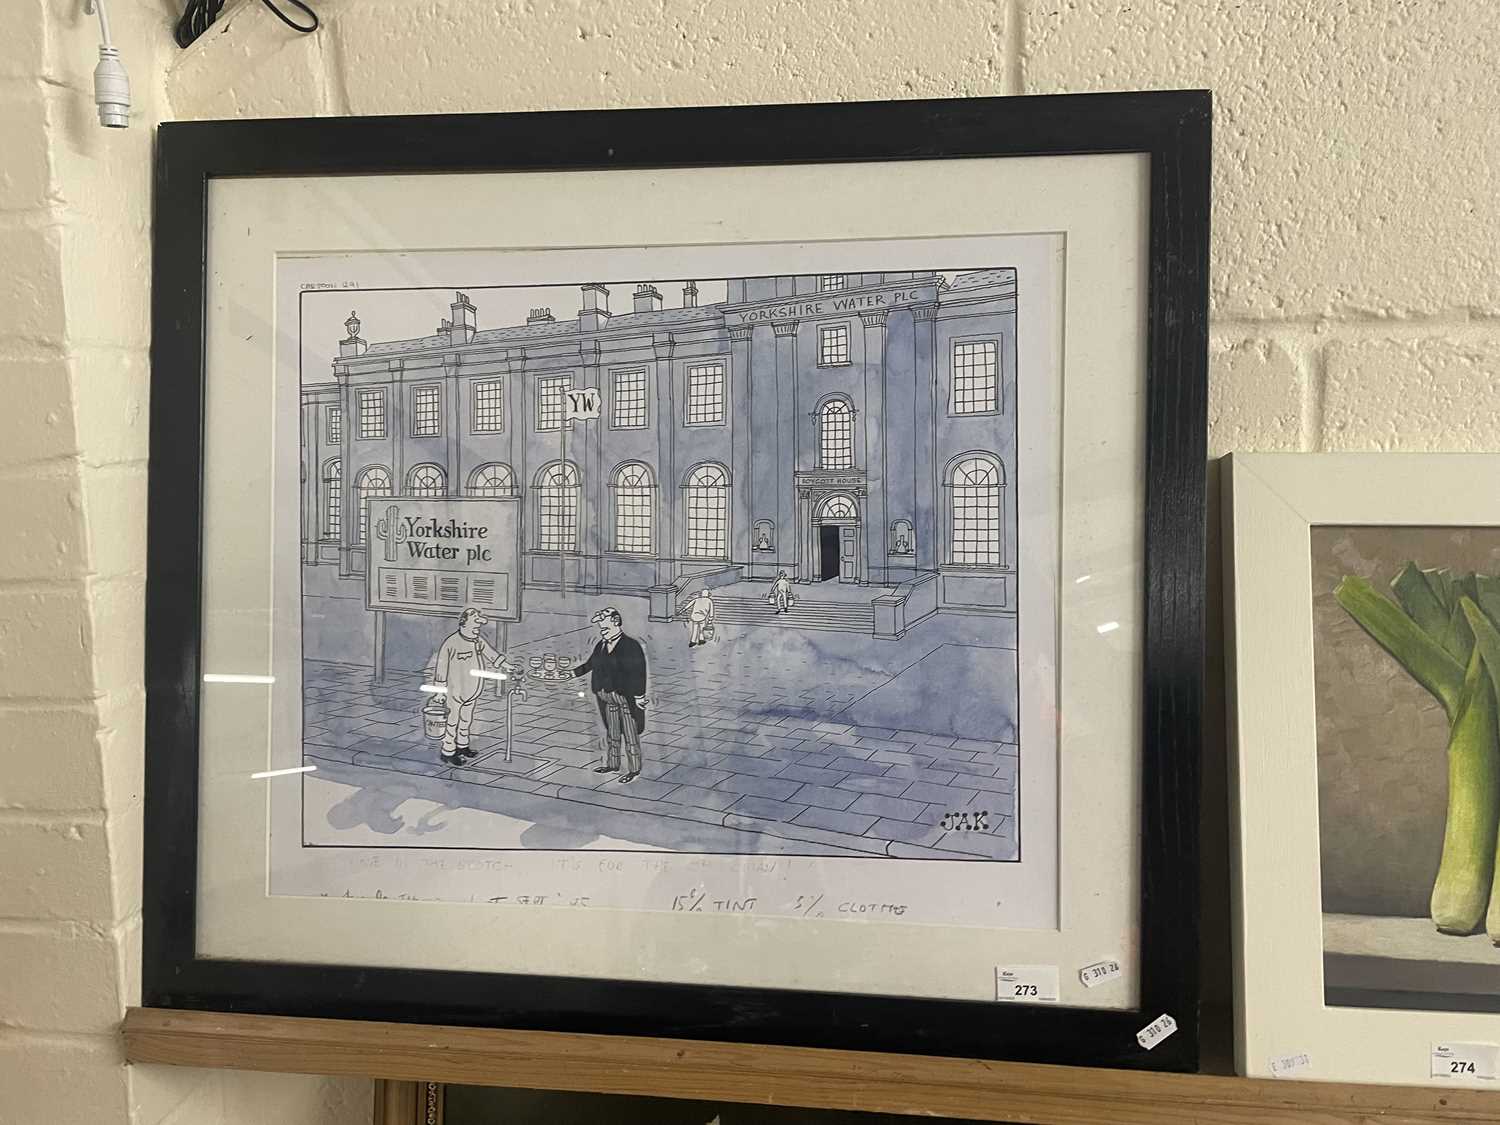 The London Evening Standard cartoonist Jak "None in the Scotch its for the Chairman", framed and